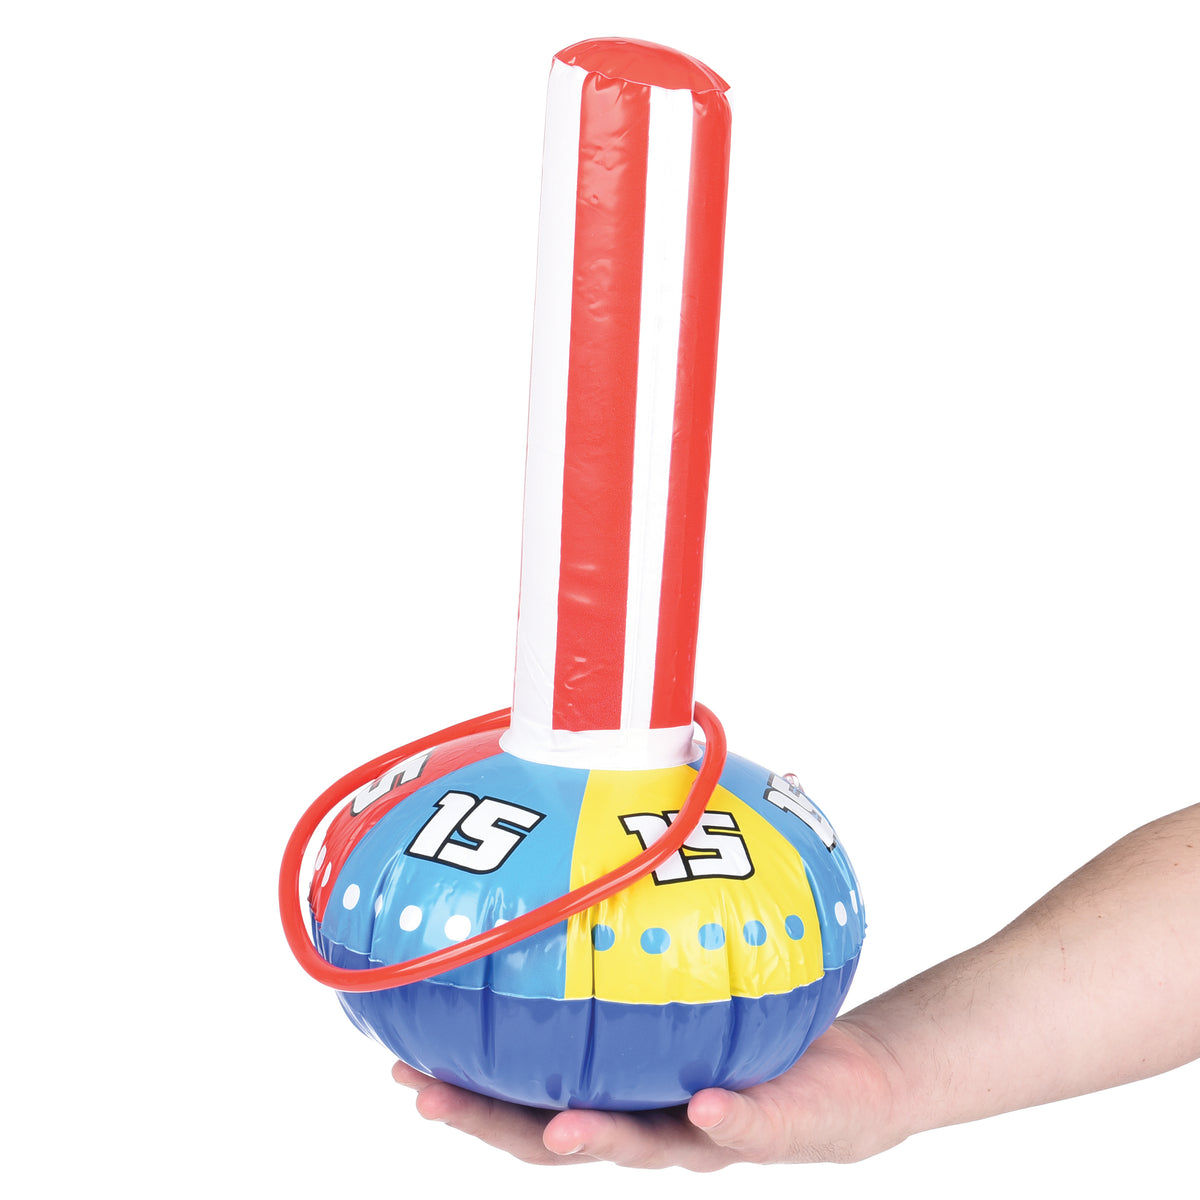 Ring Toss Game Set - Little Learners Toys